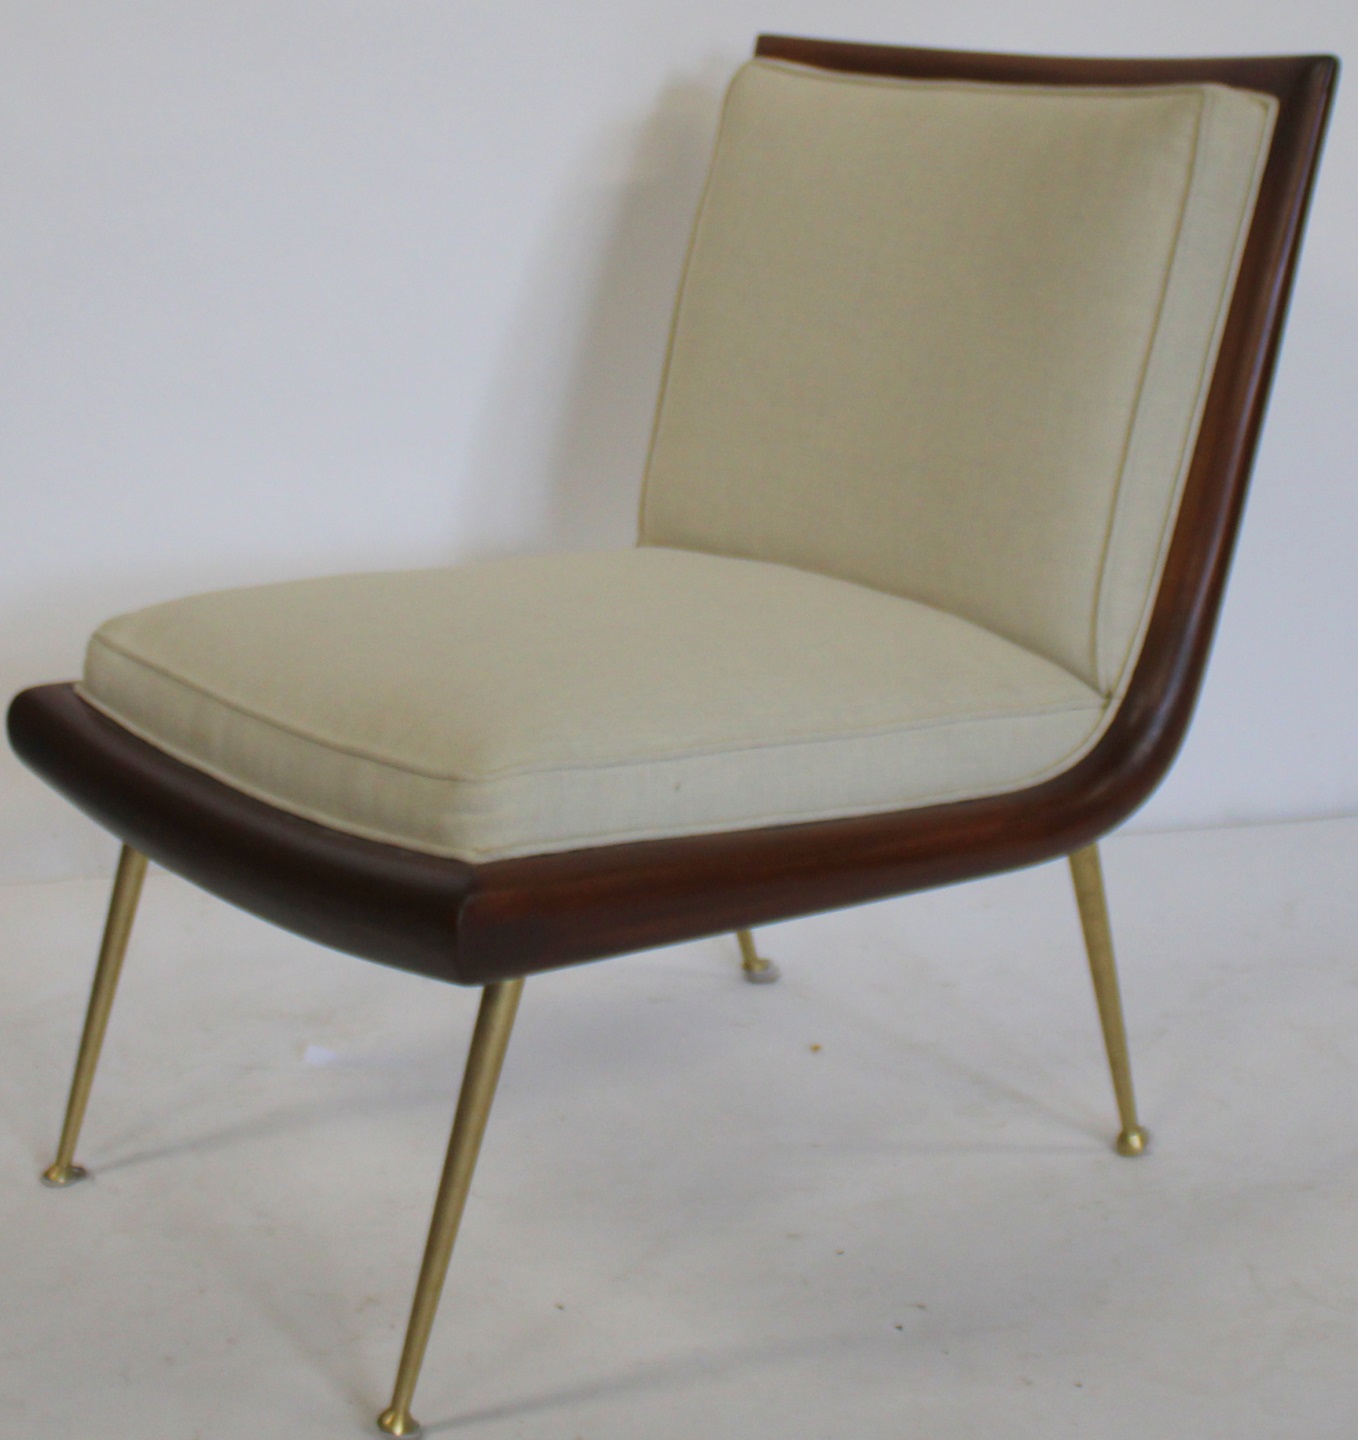 UNSIGNED MIDCENTURY CHAIR IN THE 3bcb9a